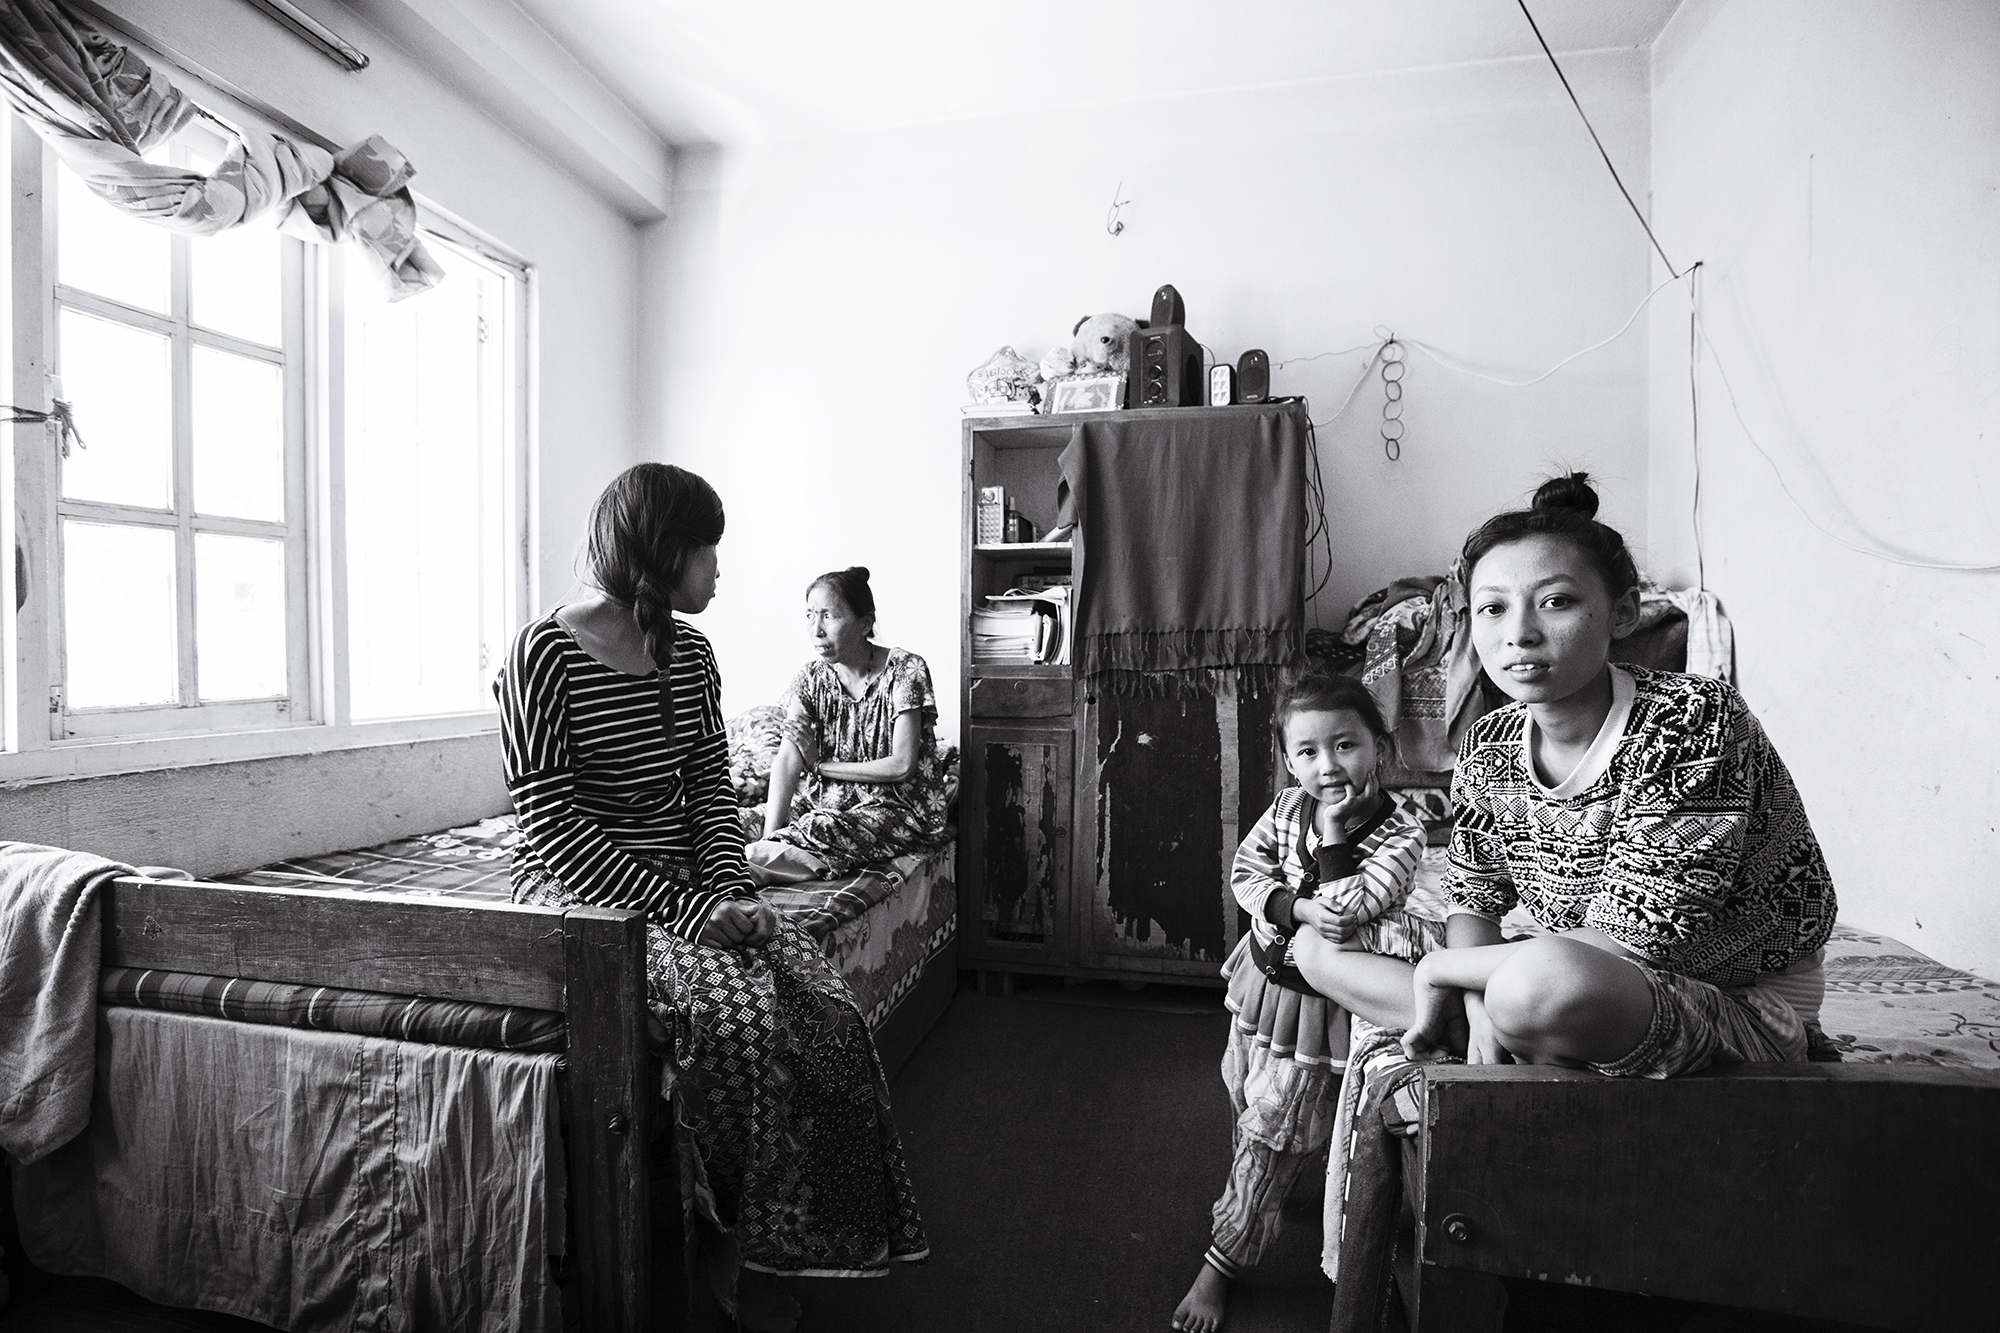  Anu (left) and her family lost their village home in the 2015 Nepal earthquake. The family relocated shortly after to a one room apartment in Kathmandu. 